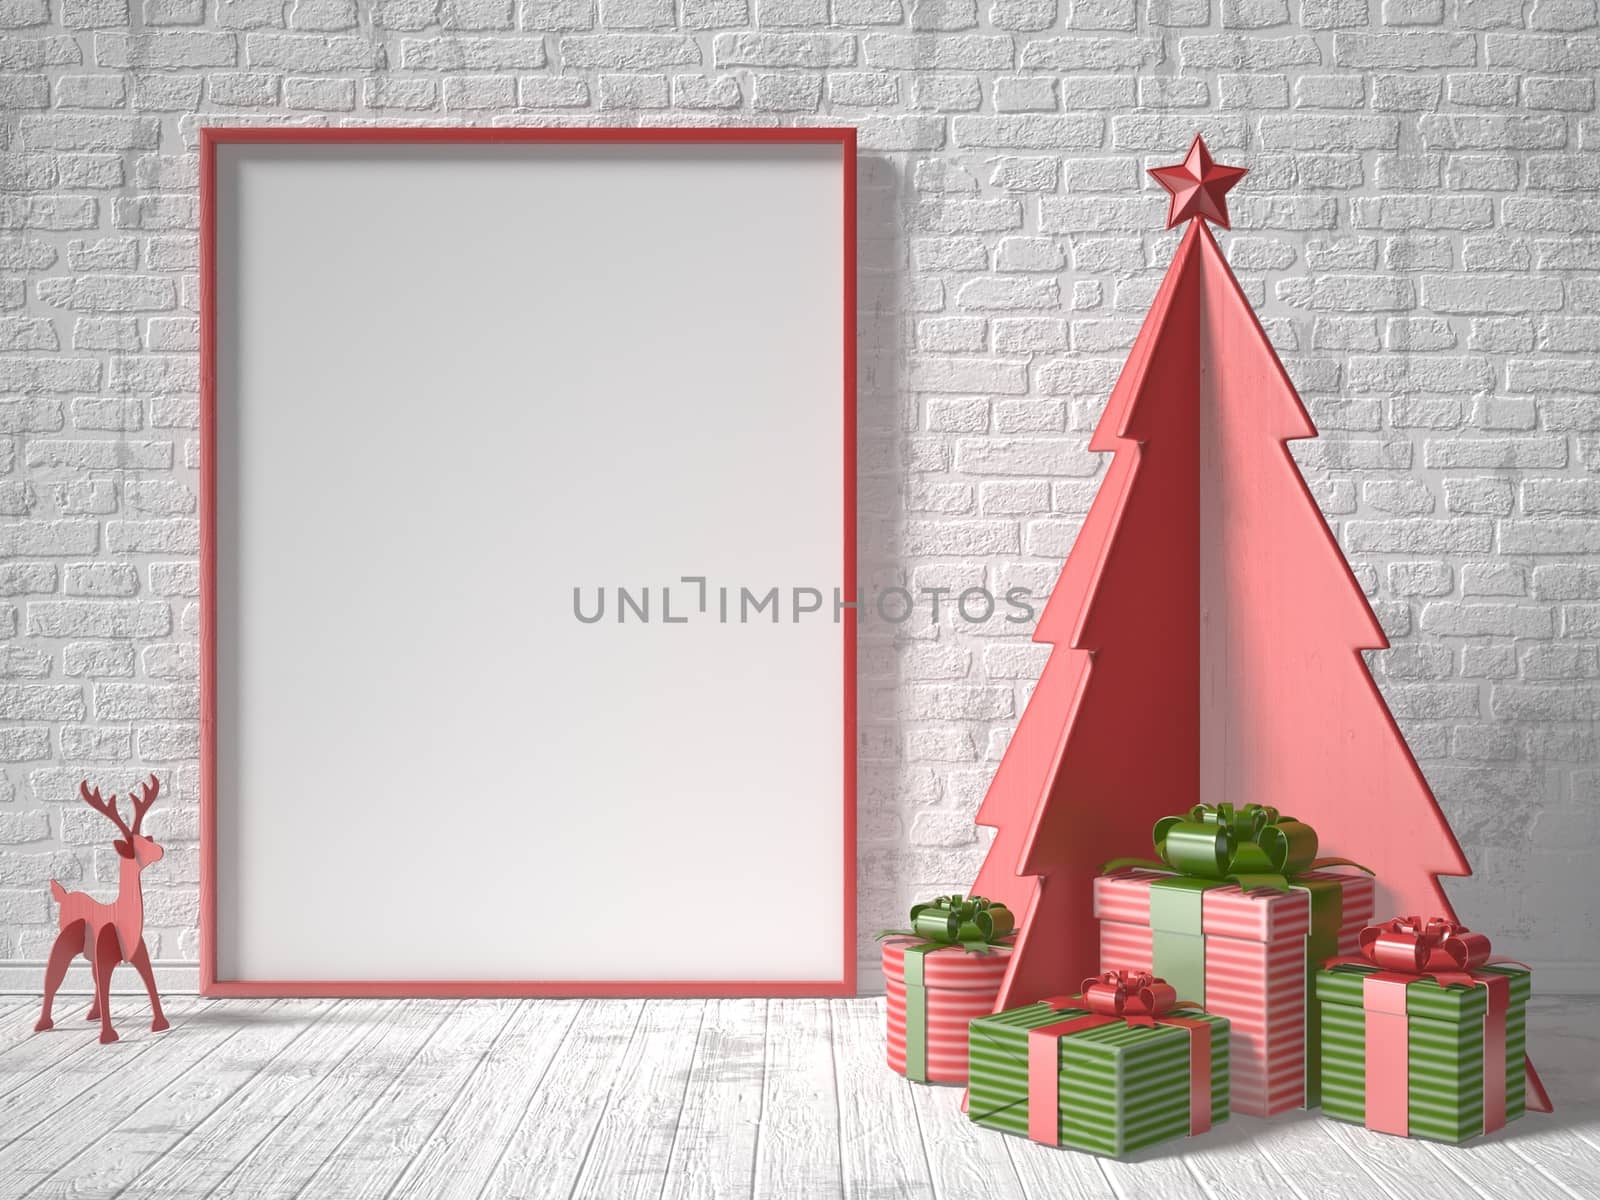 Mock up blank picture frame, Christmas tree decoration and gifts. 3D rendering illustration